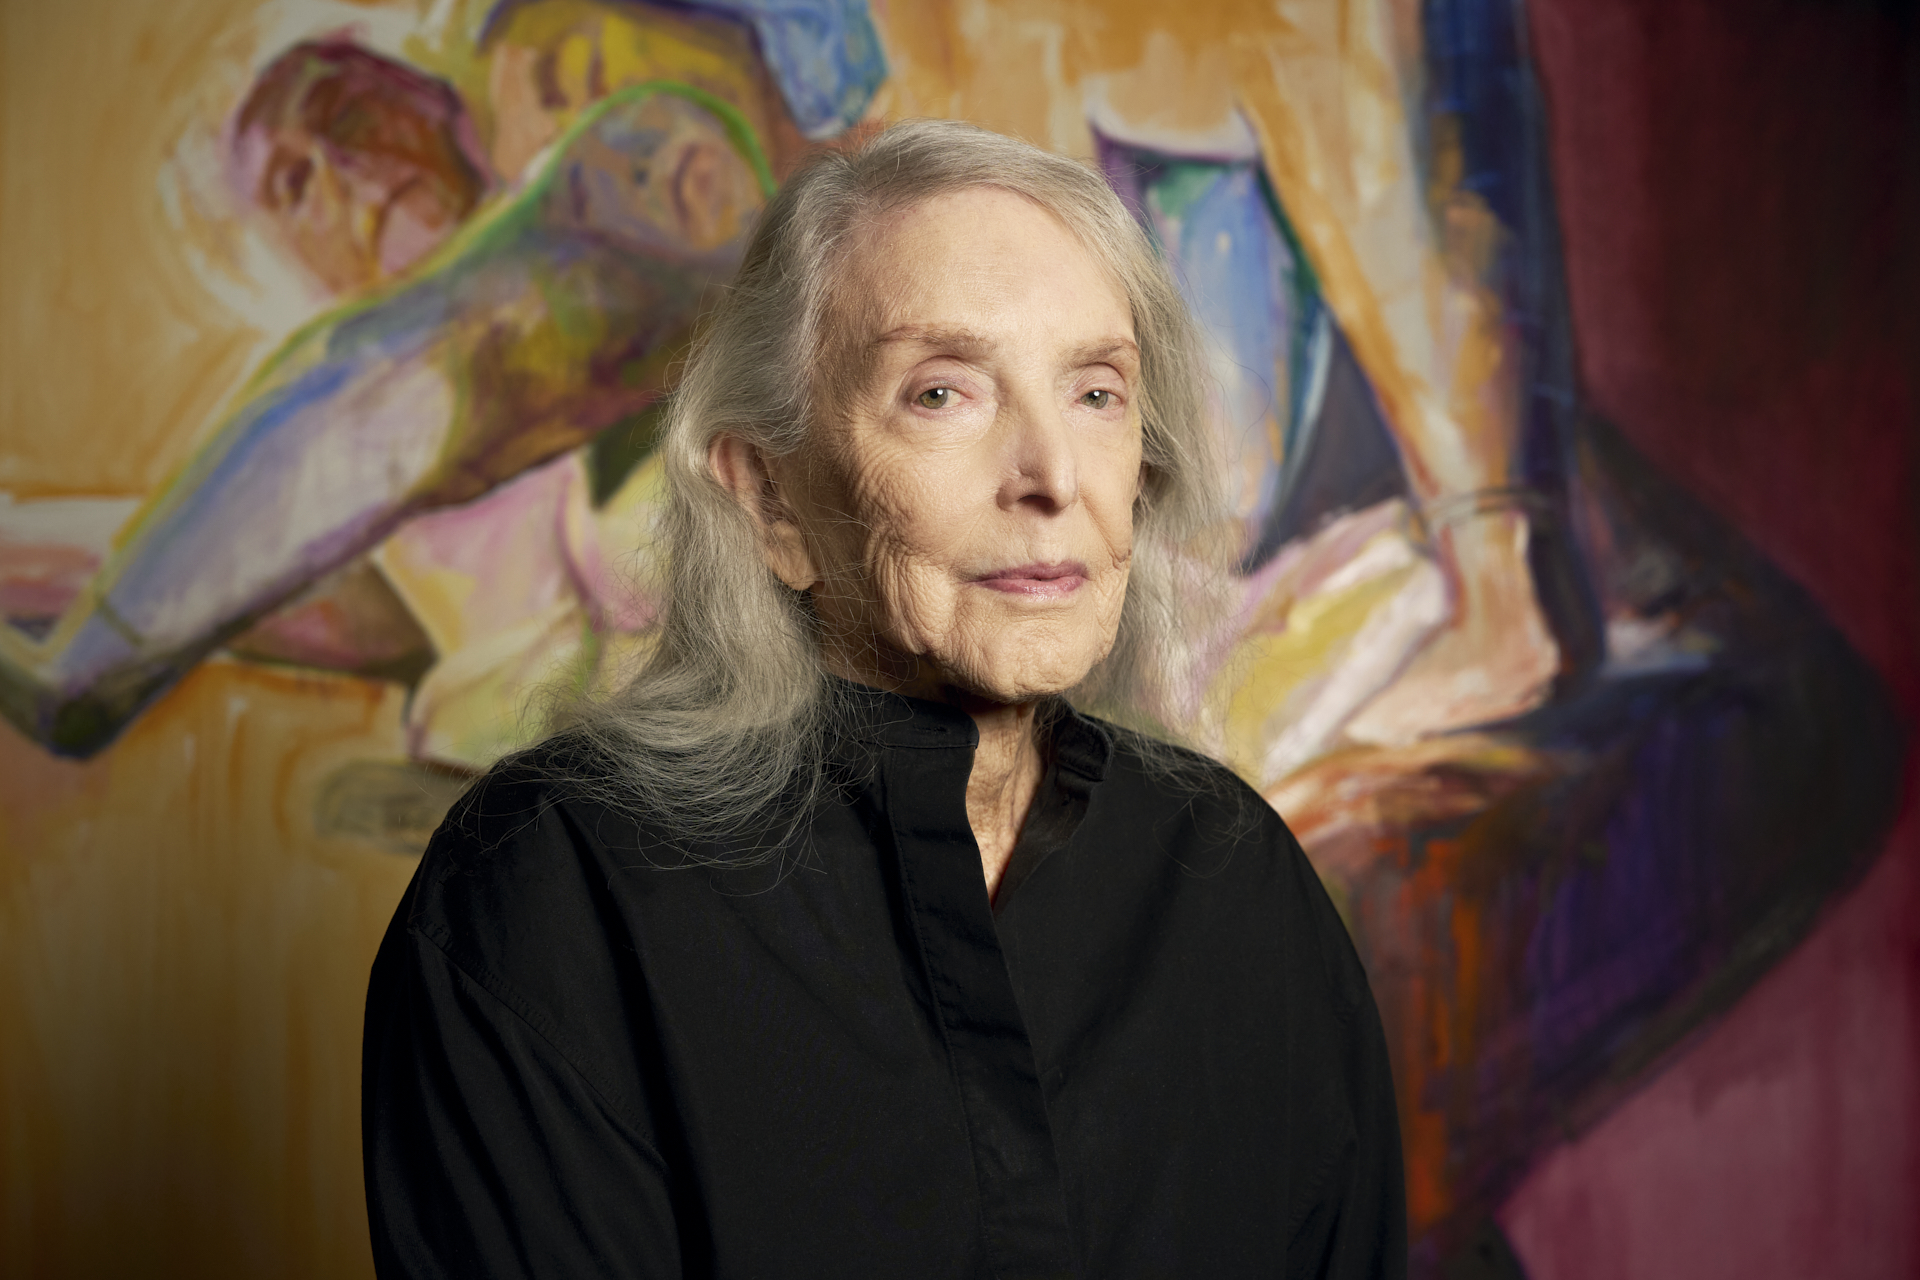 A 90-something white woman with beautiful silver hair and blue eyes is seen in front of an expresive, colorful, double self-portrait that she painted.